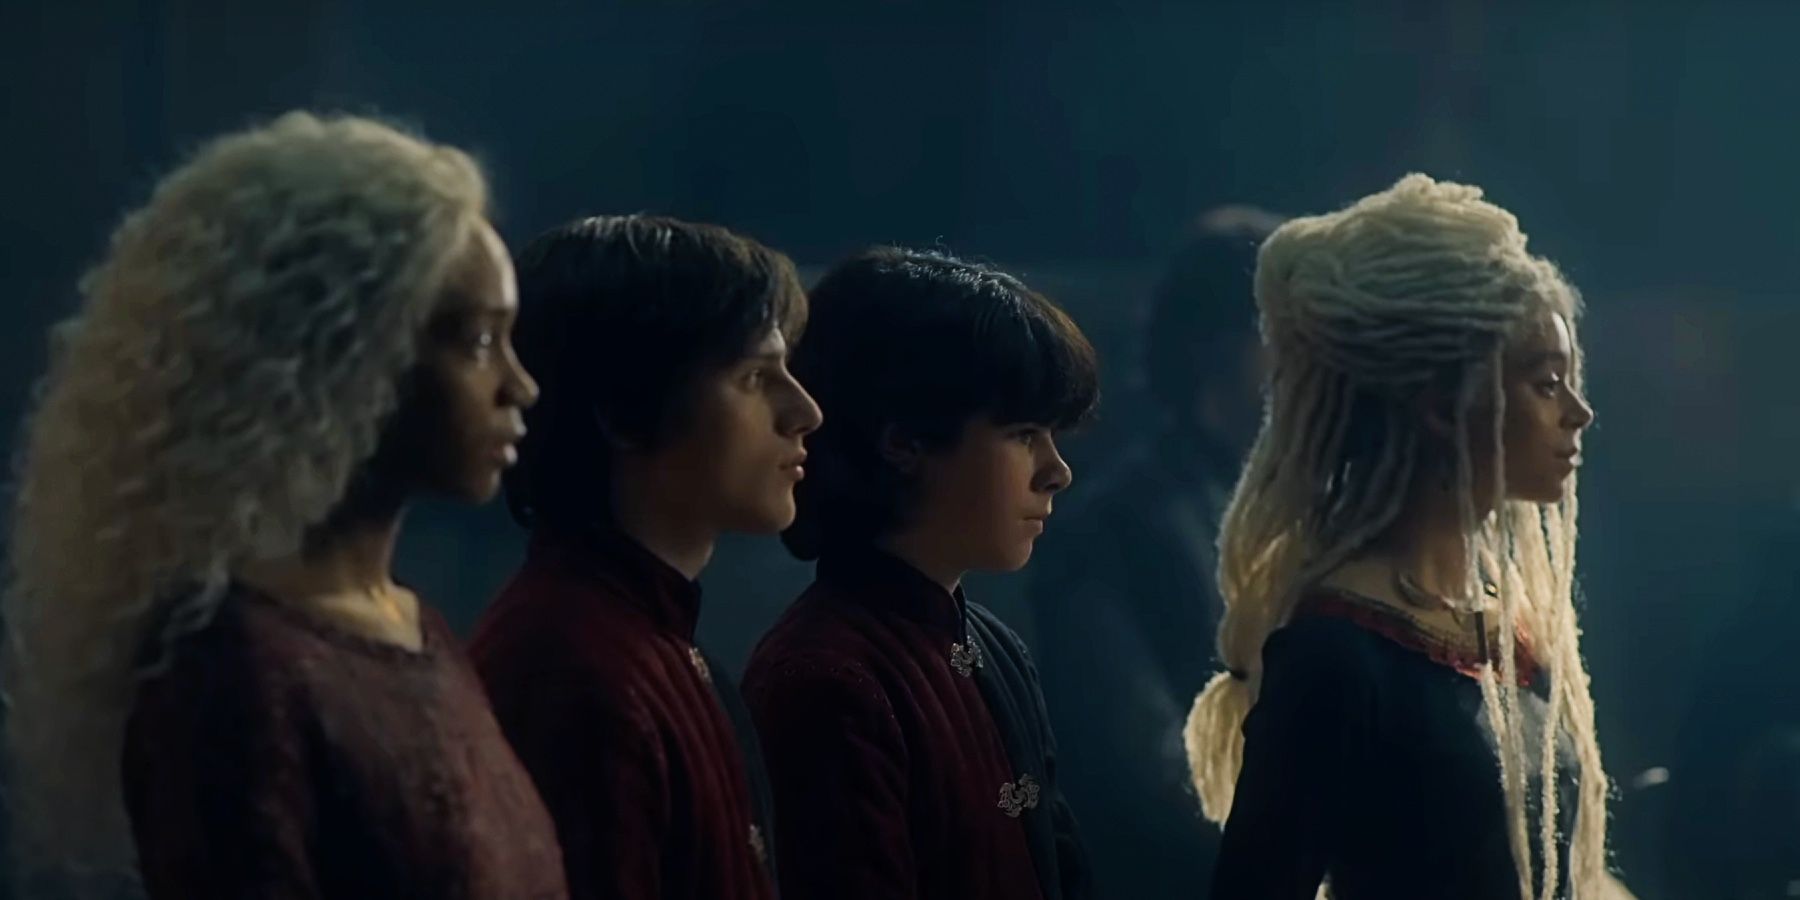 Rhaenyra's sons and Daemon's daughters in House of the Dragon season 1